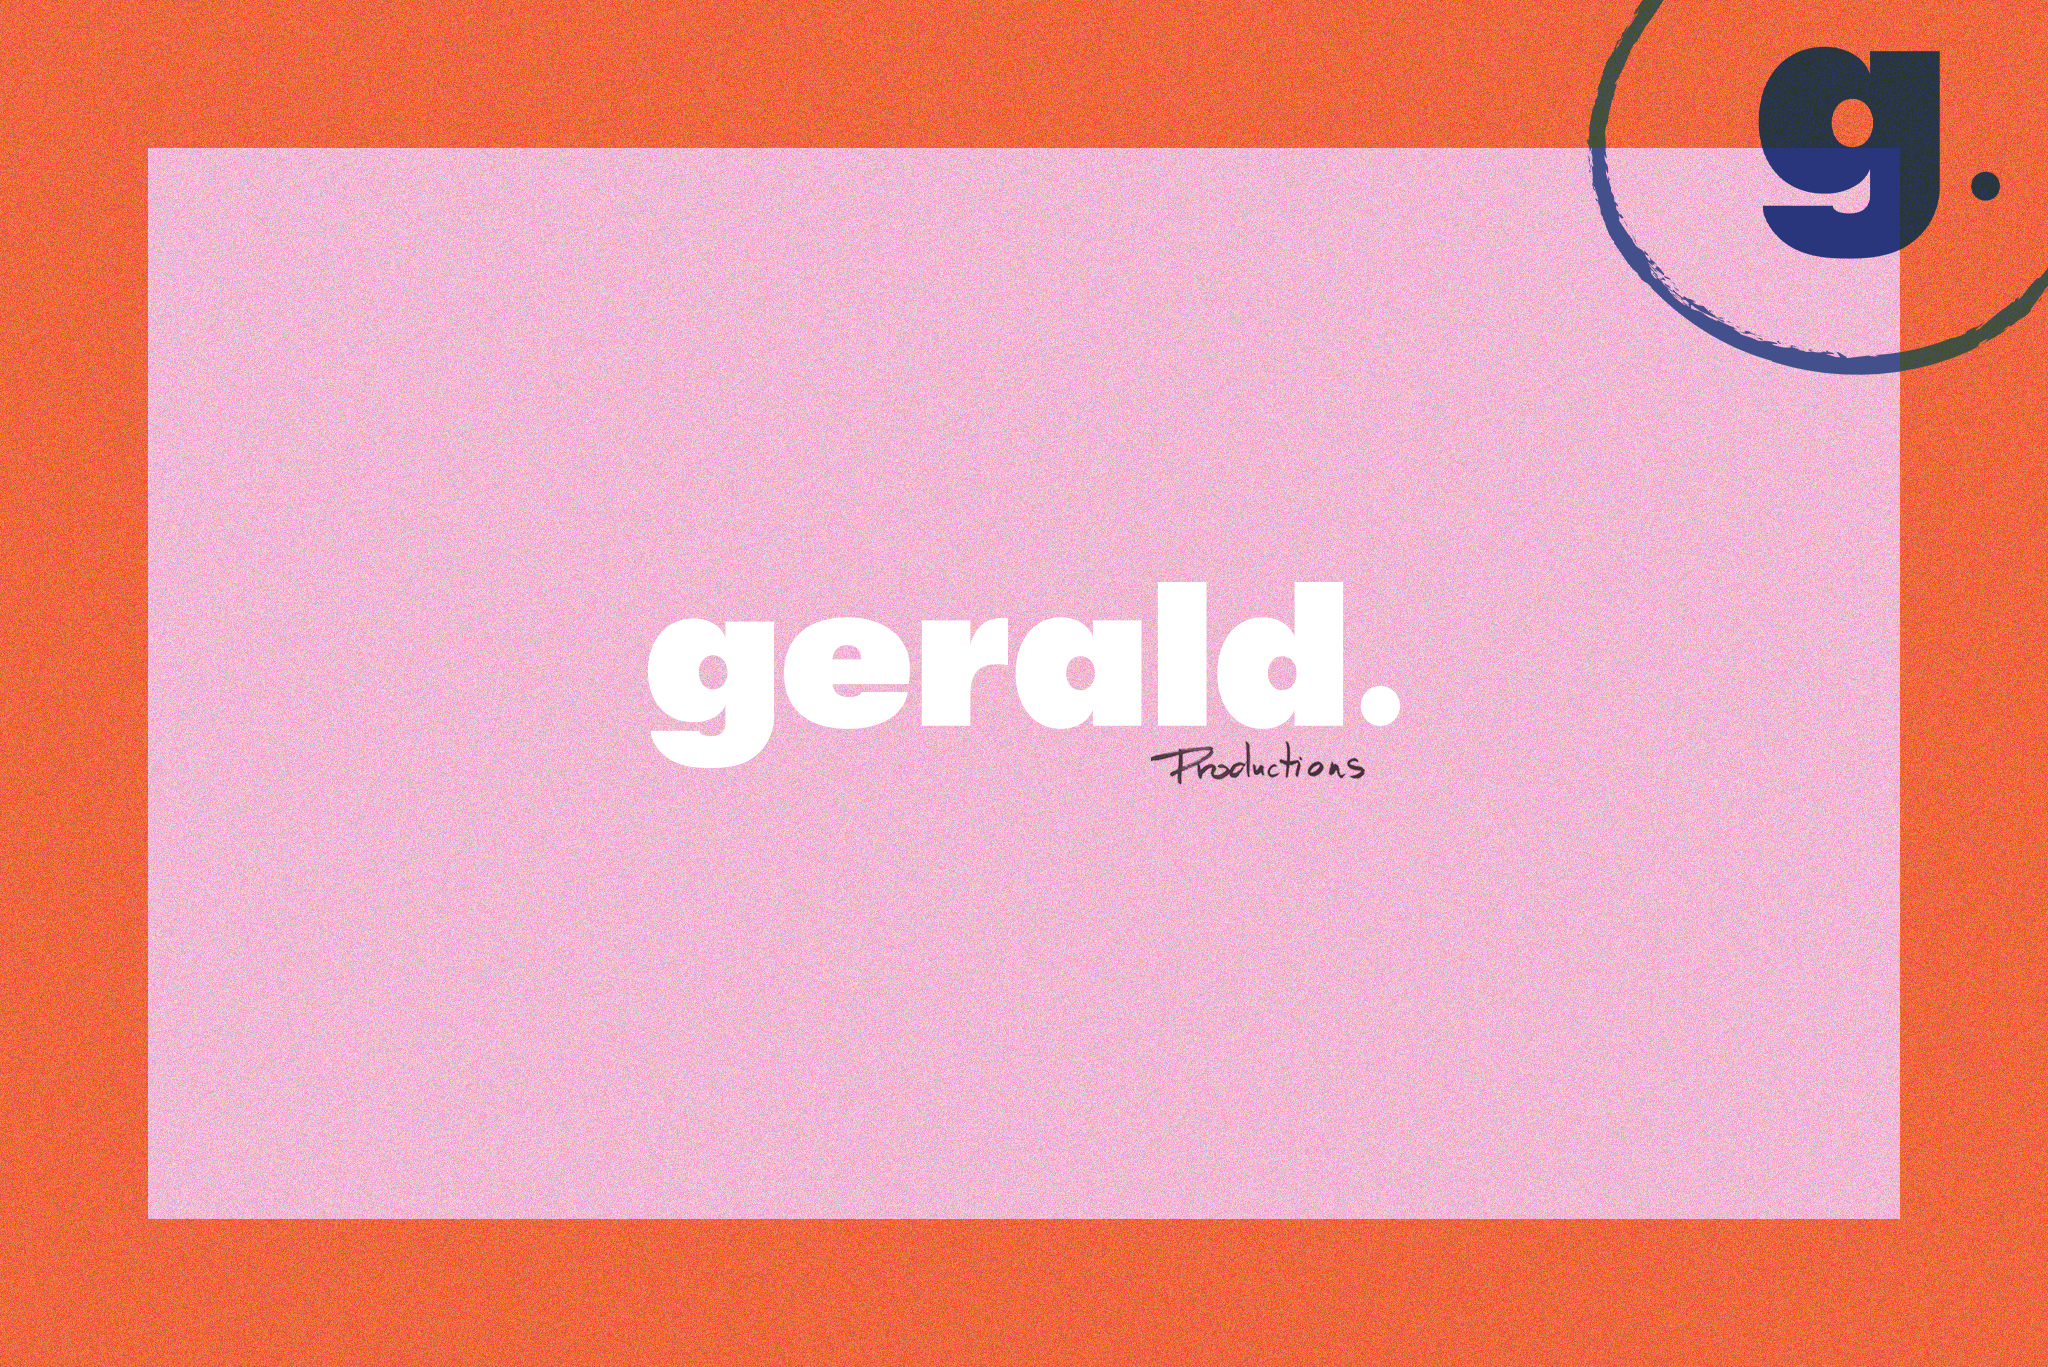 gerald_cover